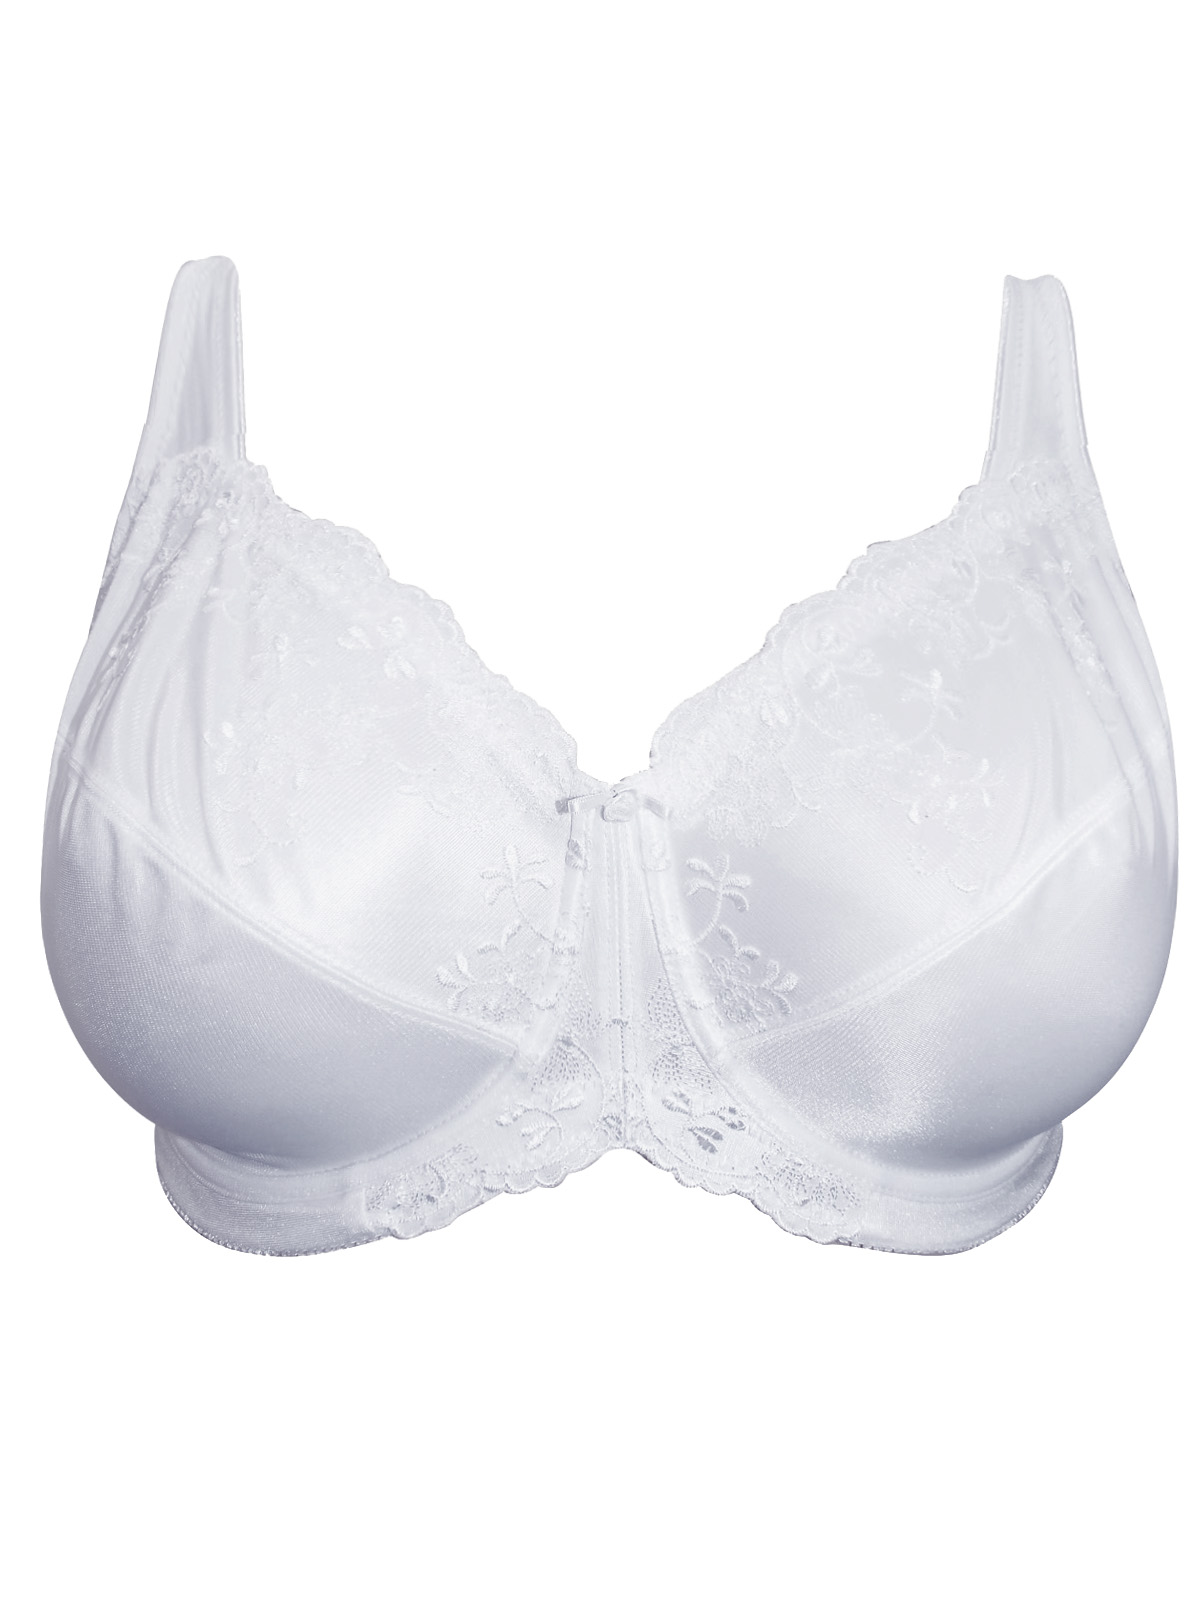 Trofe - - Trofé WHITE Bianca Full Cup Under-Wired Minimiser Bra - Size 34  to 42 (E cup)